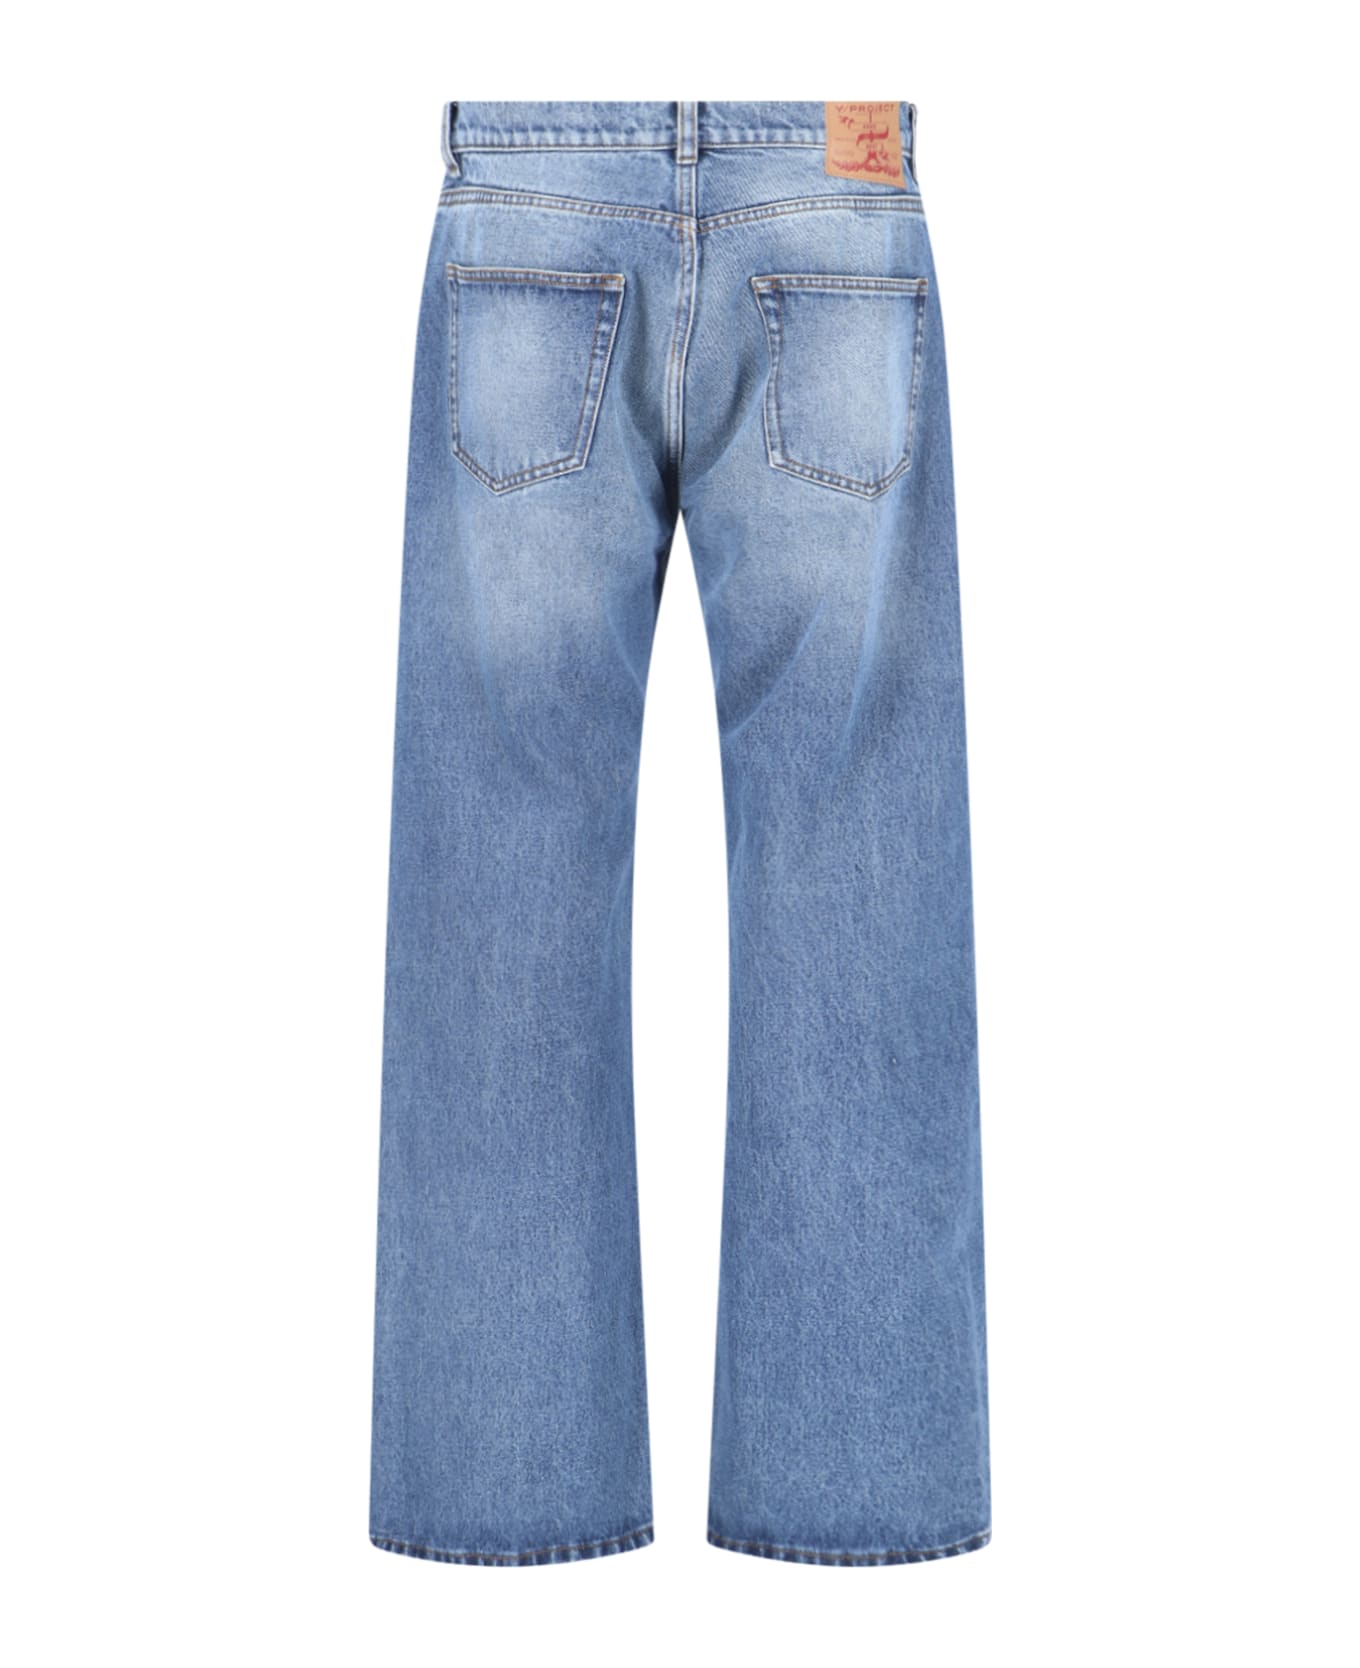 Y/Project "evergreen" Jeans - Blue